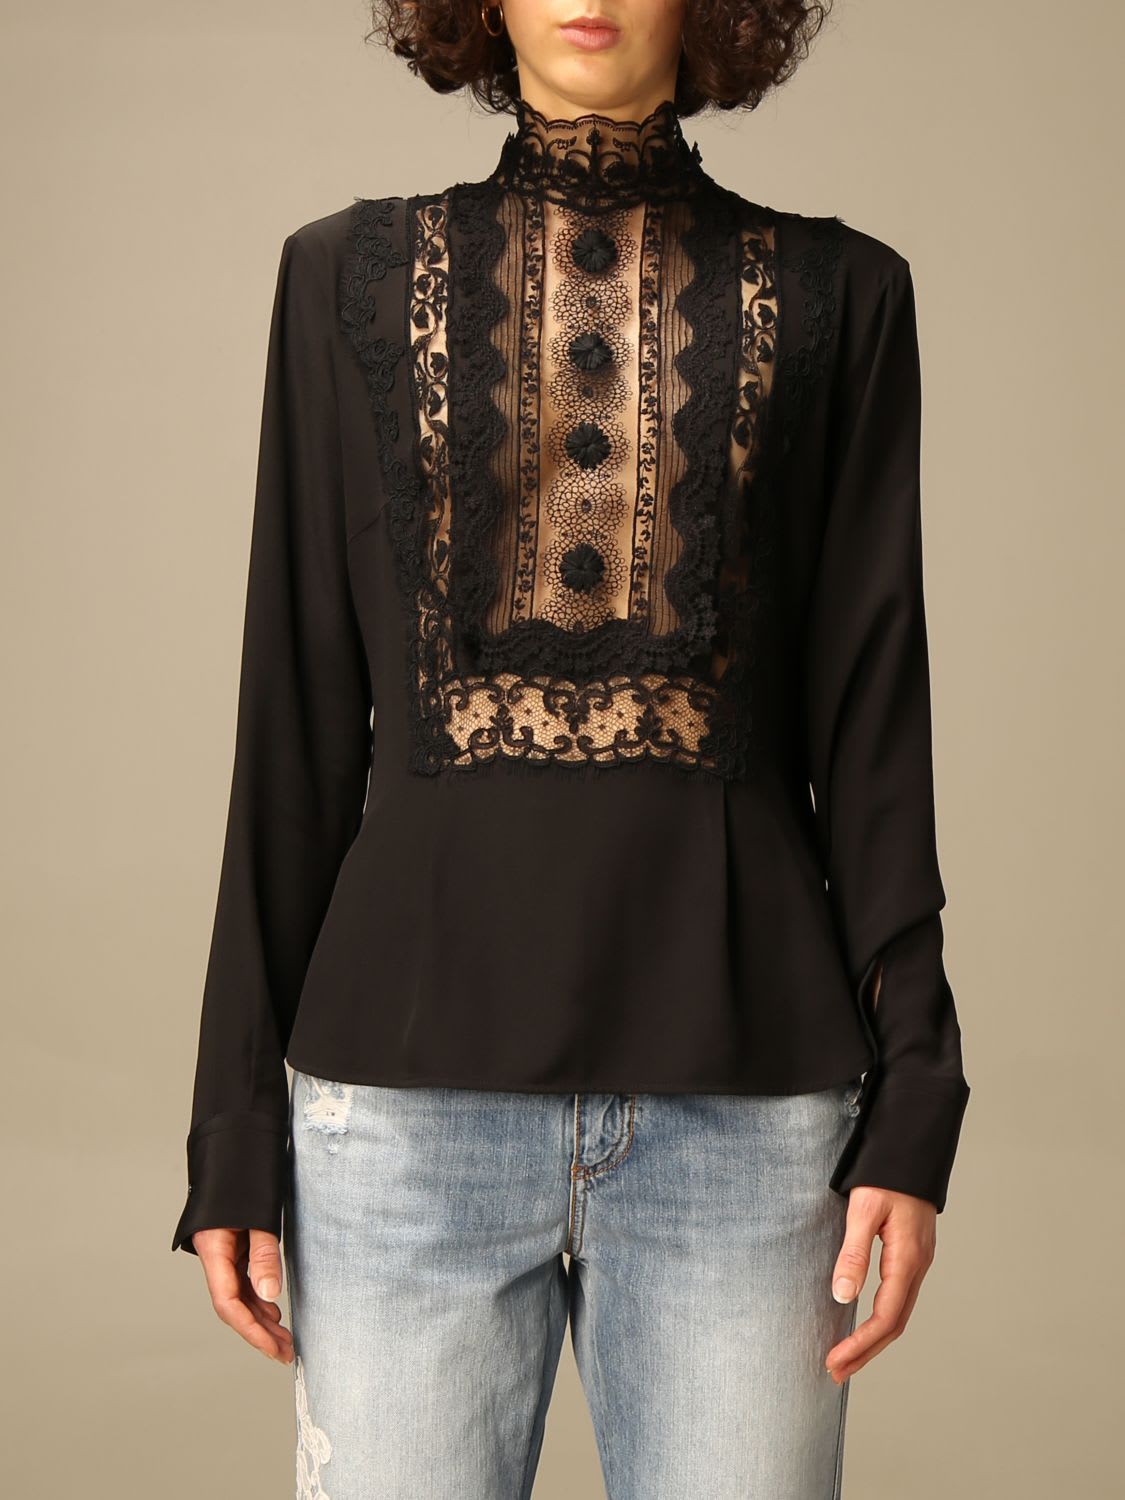 Ermanno Scervino Top Ermanno Scervino Shirt With Lace Inserts